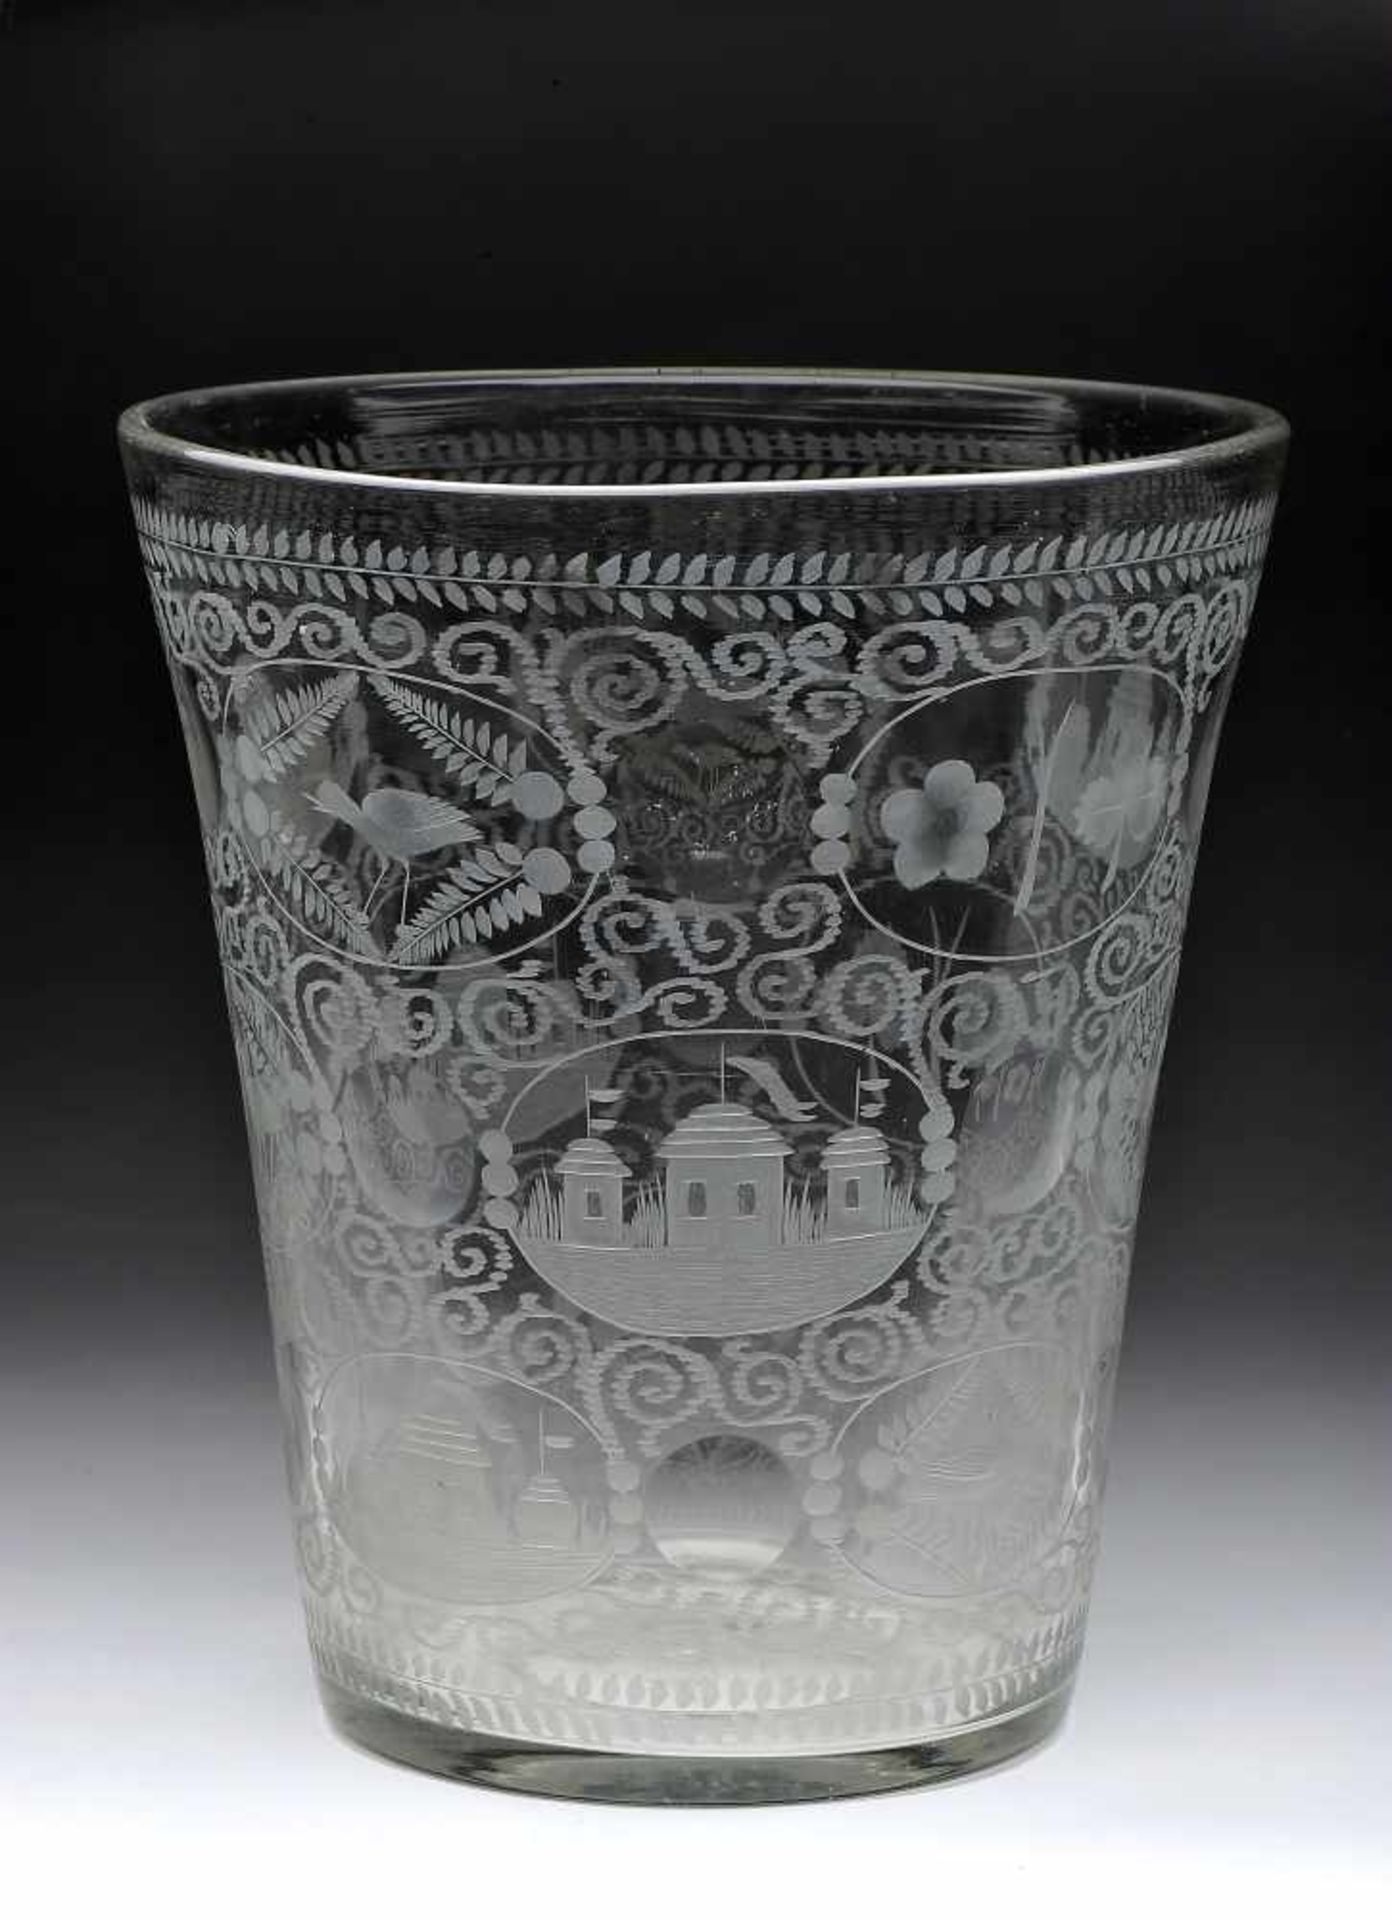 A Large Glass, glass, engraved decoration "Flowers", oval reserves "Buildings, birds and flowers",